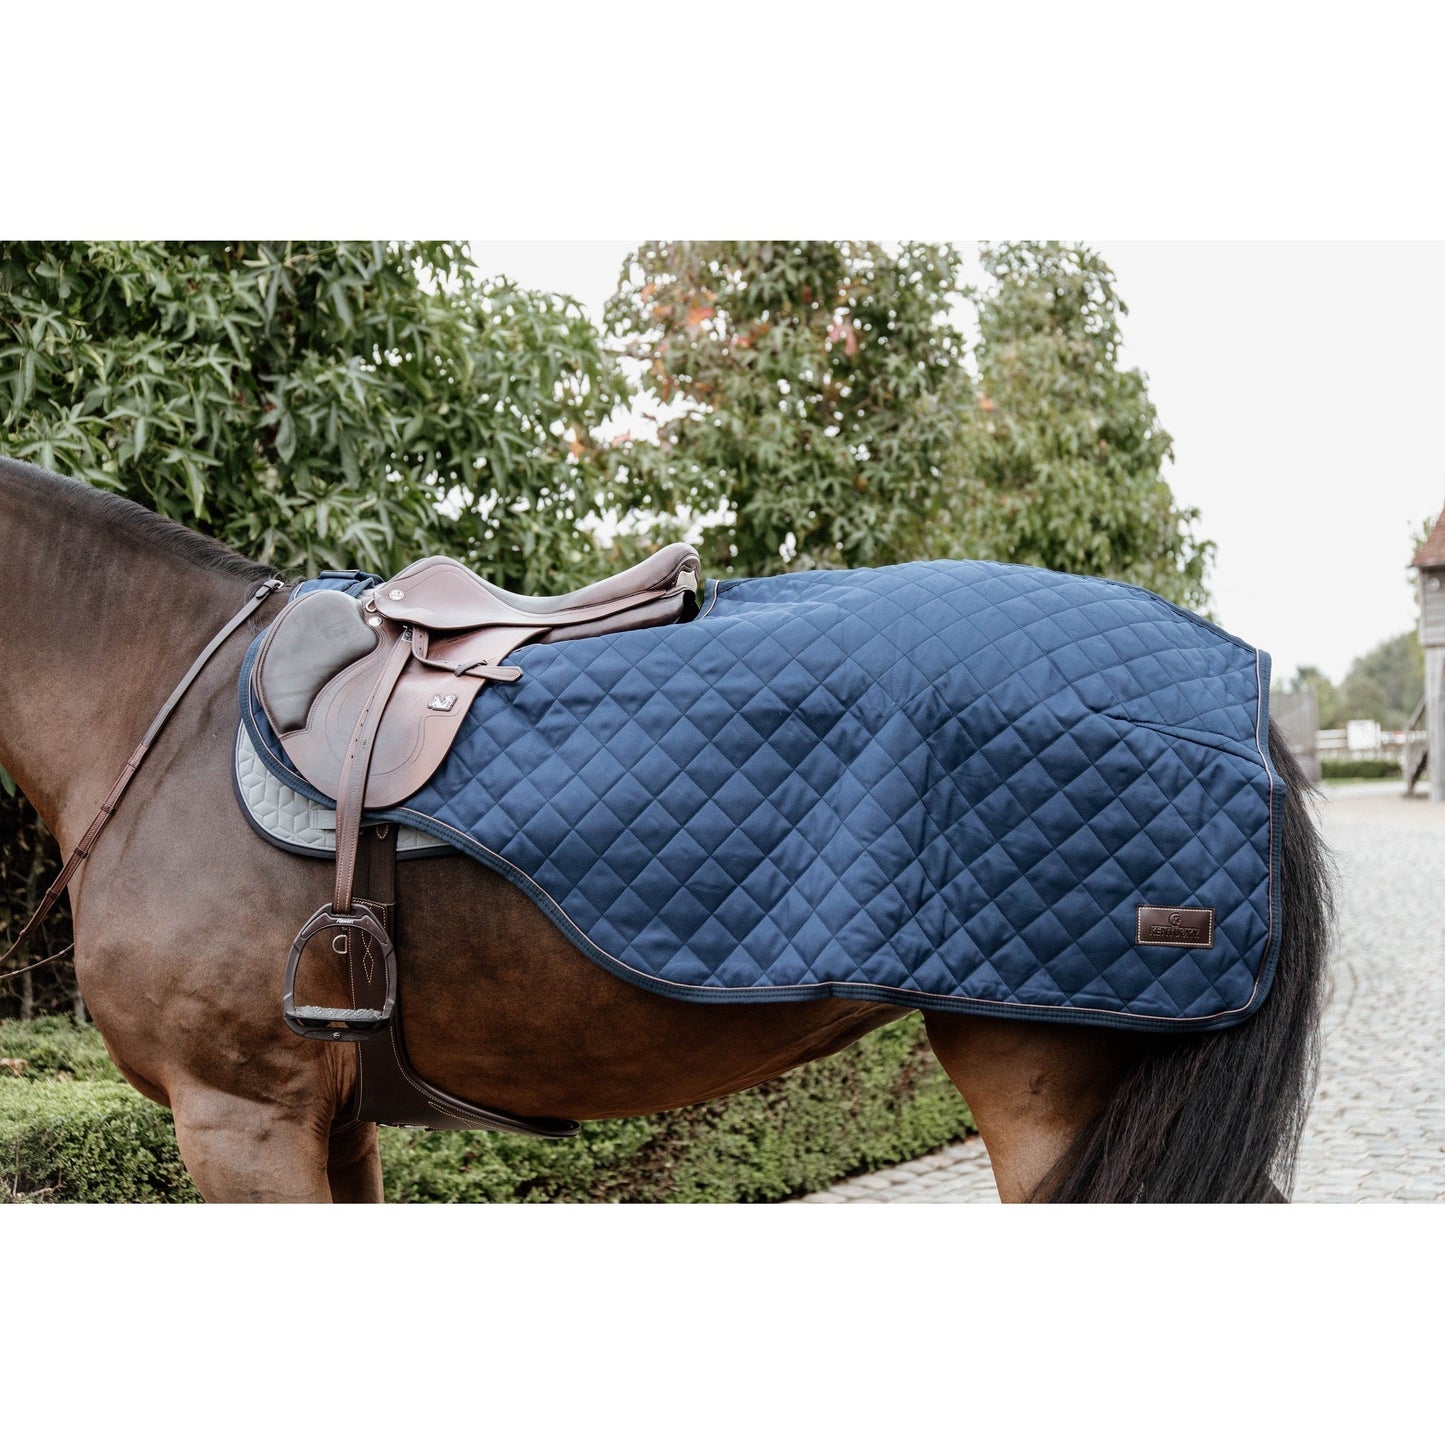 Horse with Kentucky brand blue quilted rug and saddle.